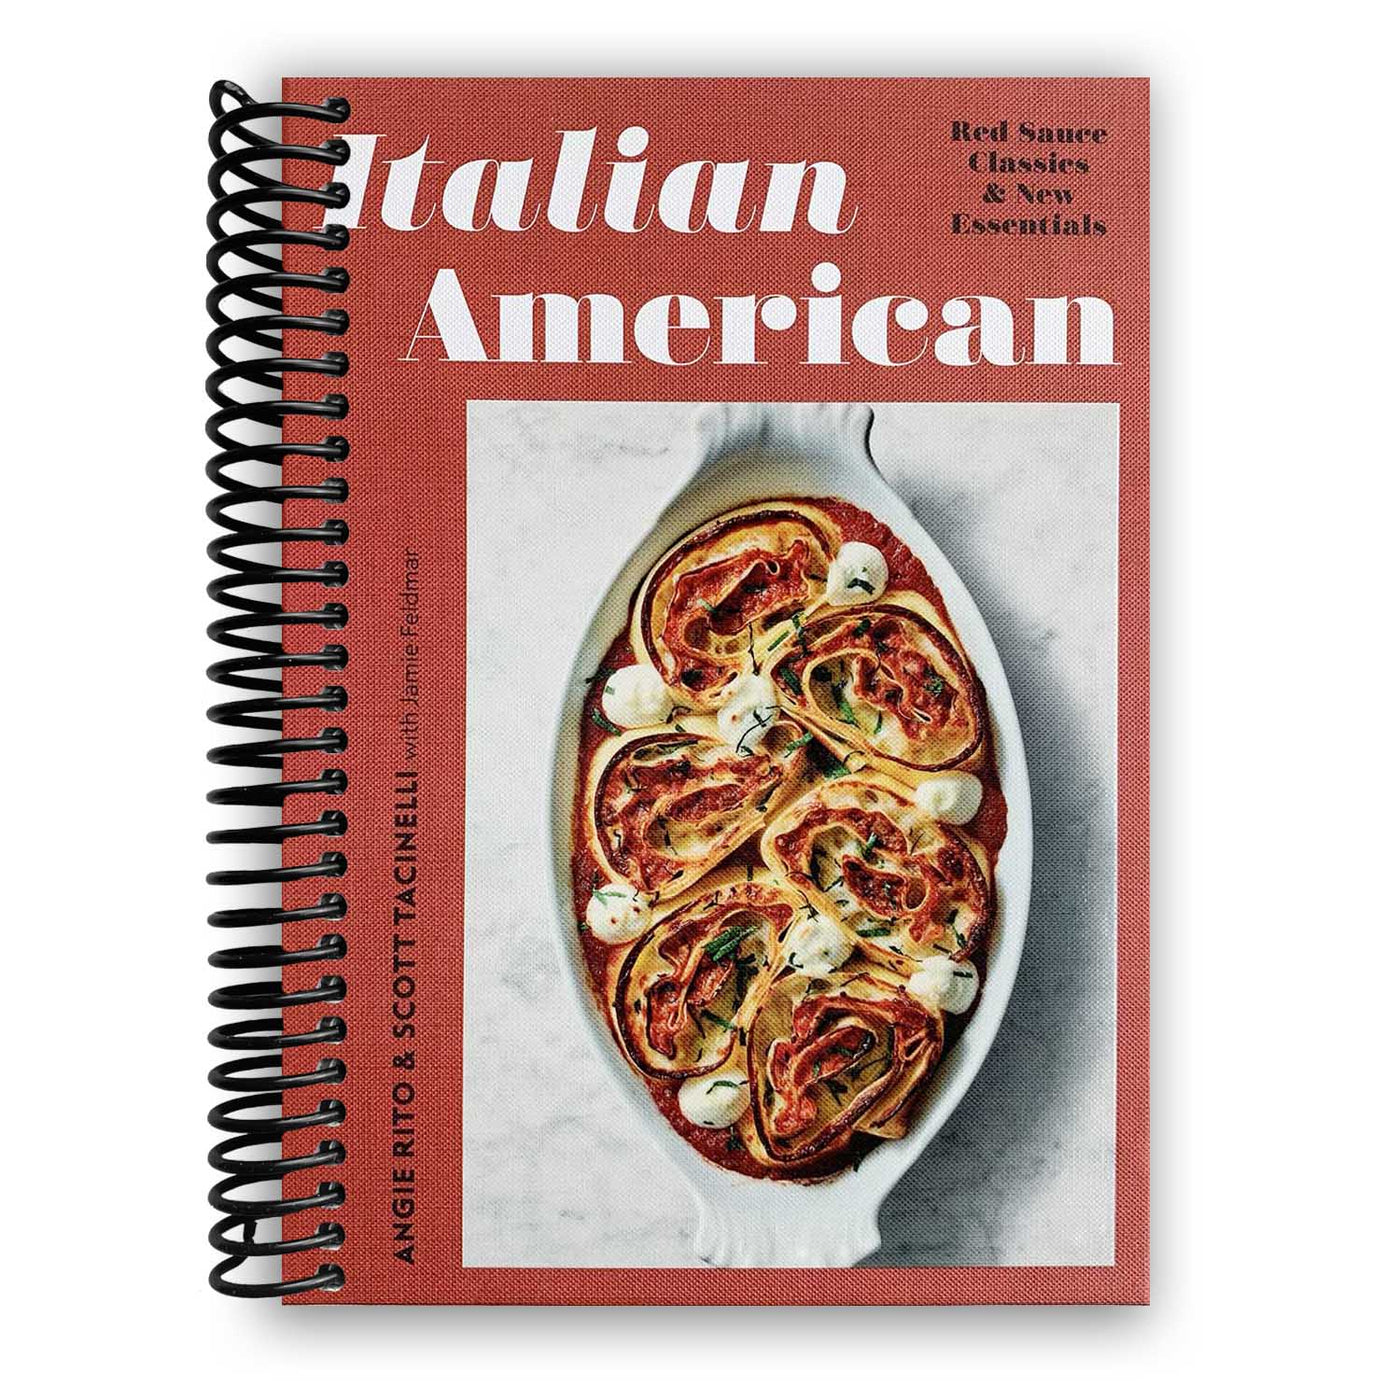 Italian American: Red Sauce Classics and New Essentials: A Cookbook (Spiral Bound)